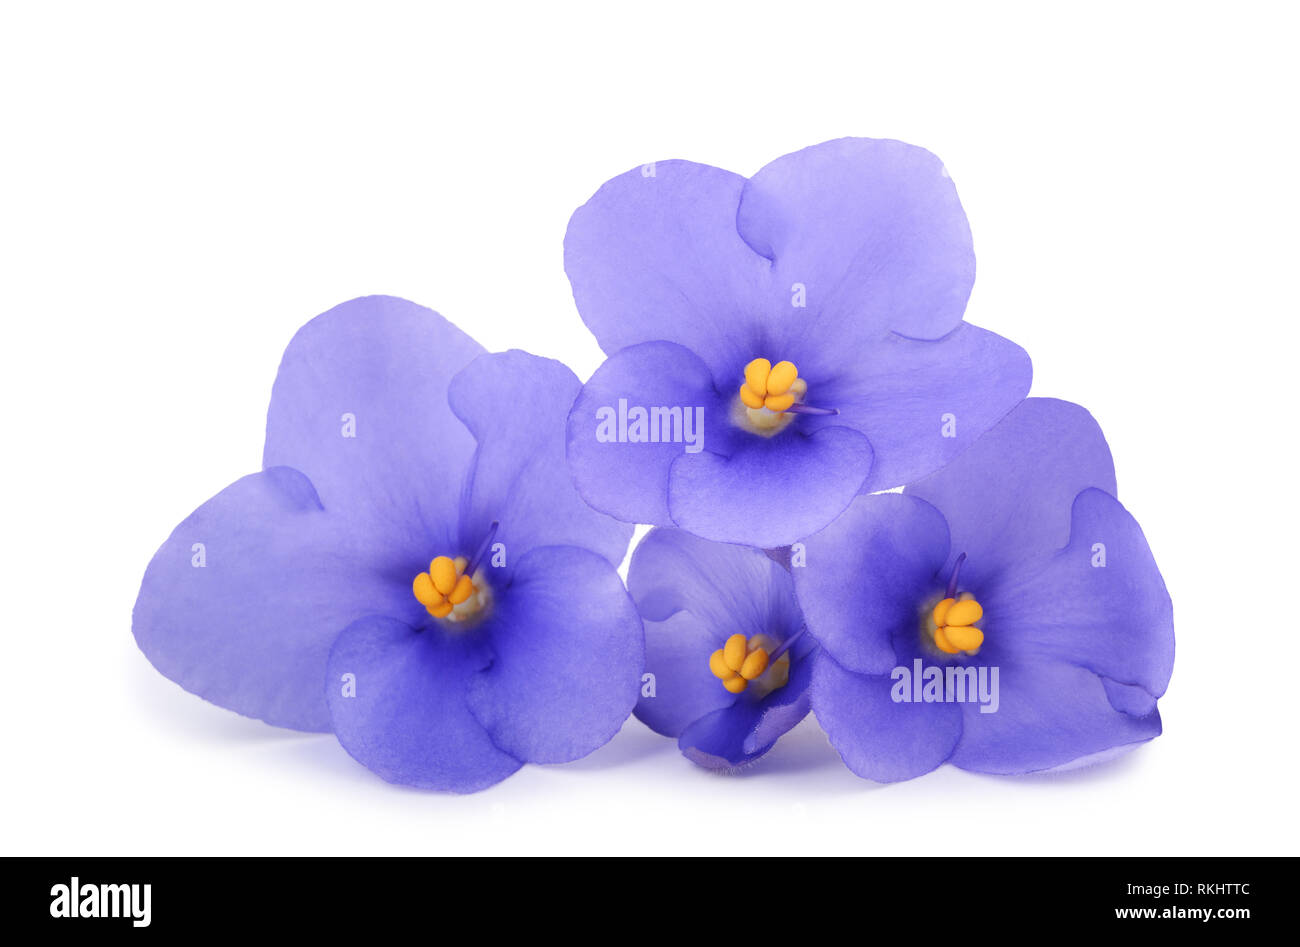 Saintpaulia (African violets) isolated on white background Stock Photo